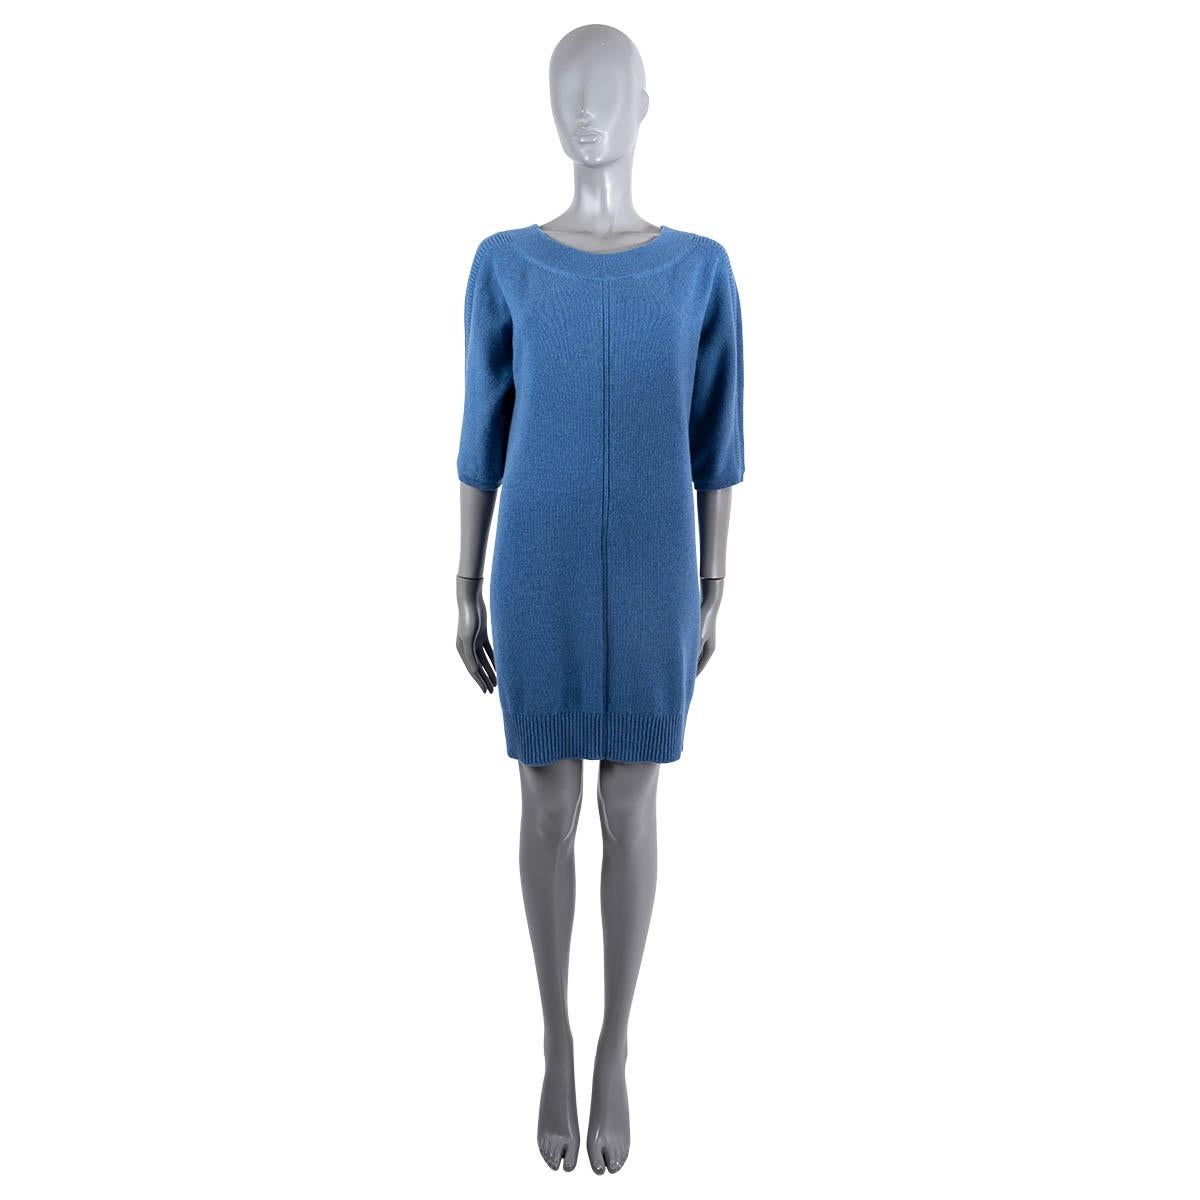 100% authentic Hermès knit dress in blue cashmere (100%). Features a relaxed fit, 3/4 sleeves with a rib-knit stripe, a knit stripe details down the center front and back, as well as rib knit cuff, hem and wide round neck. Unlined. Has been worn and